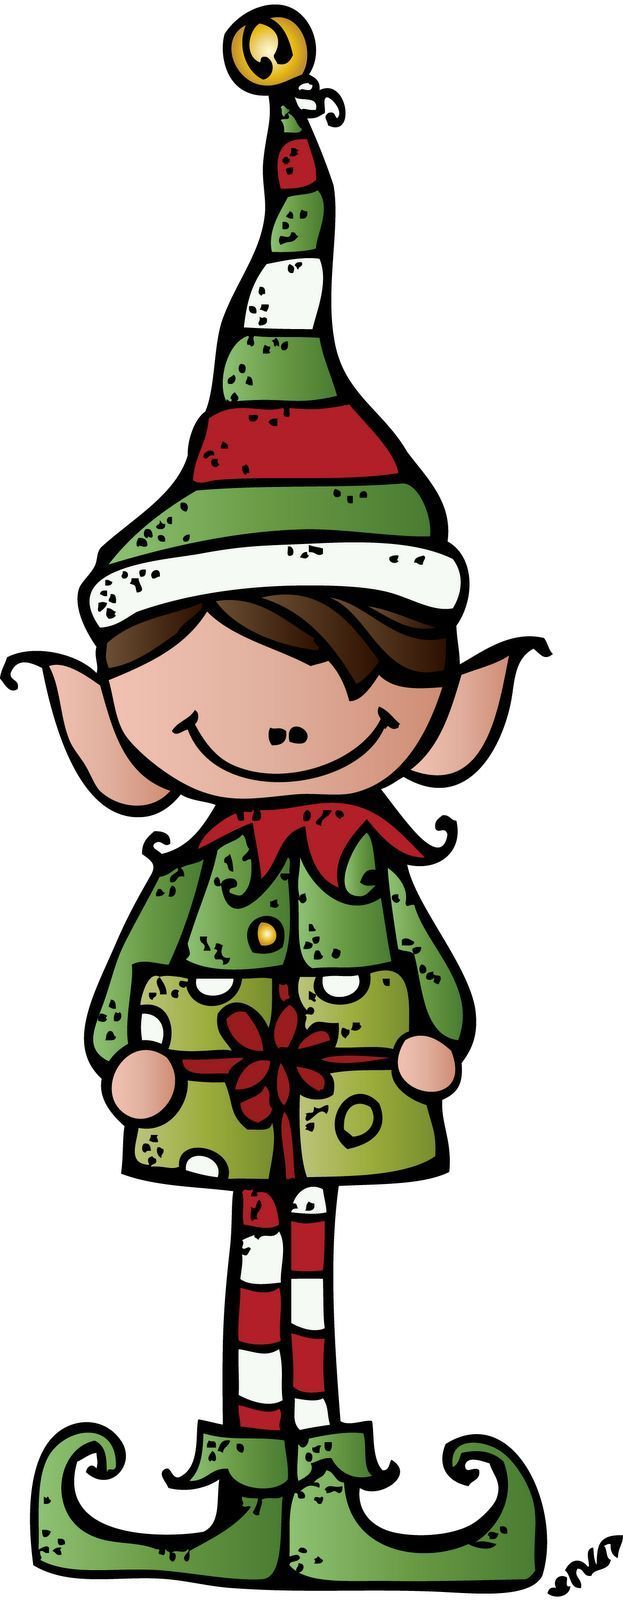 Buddy The Elf Clipart at GetDrawings | Free download